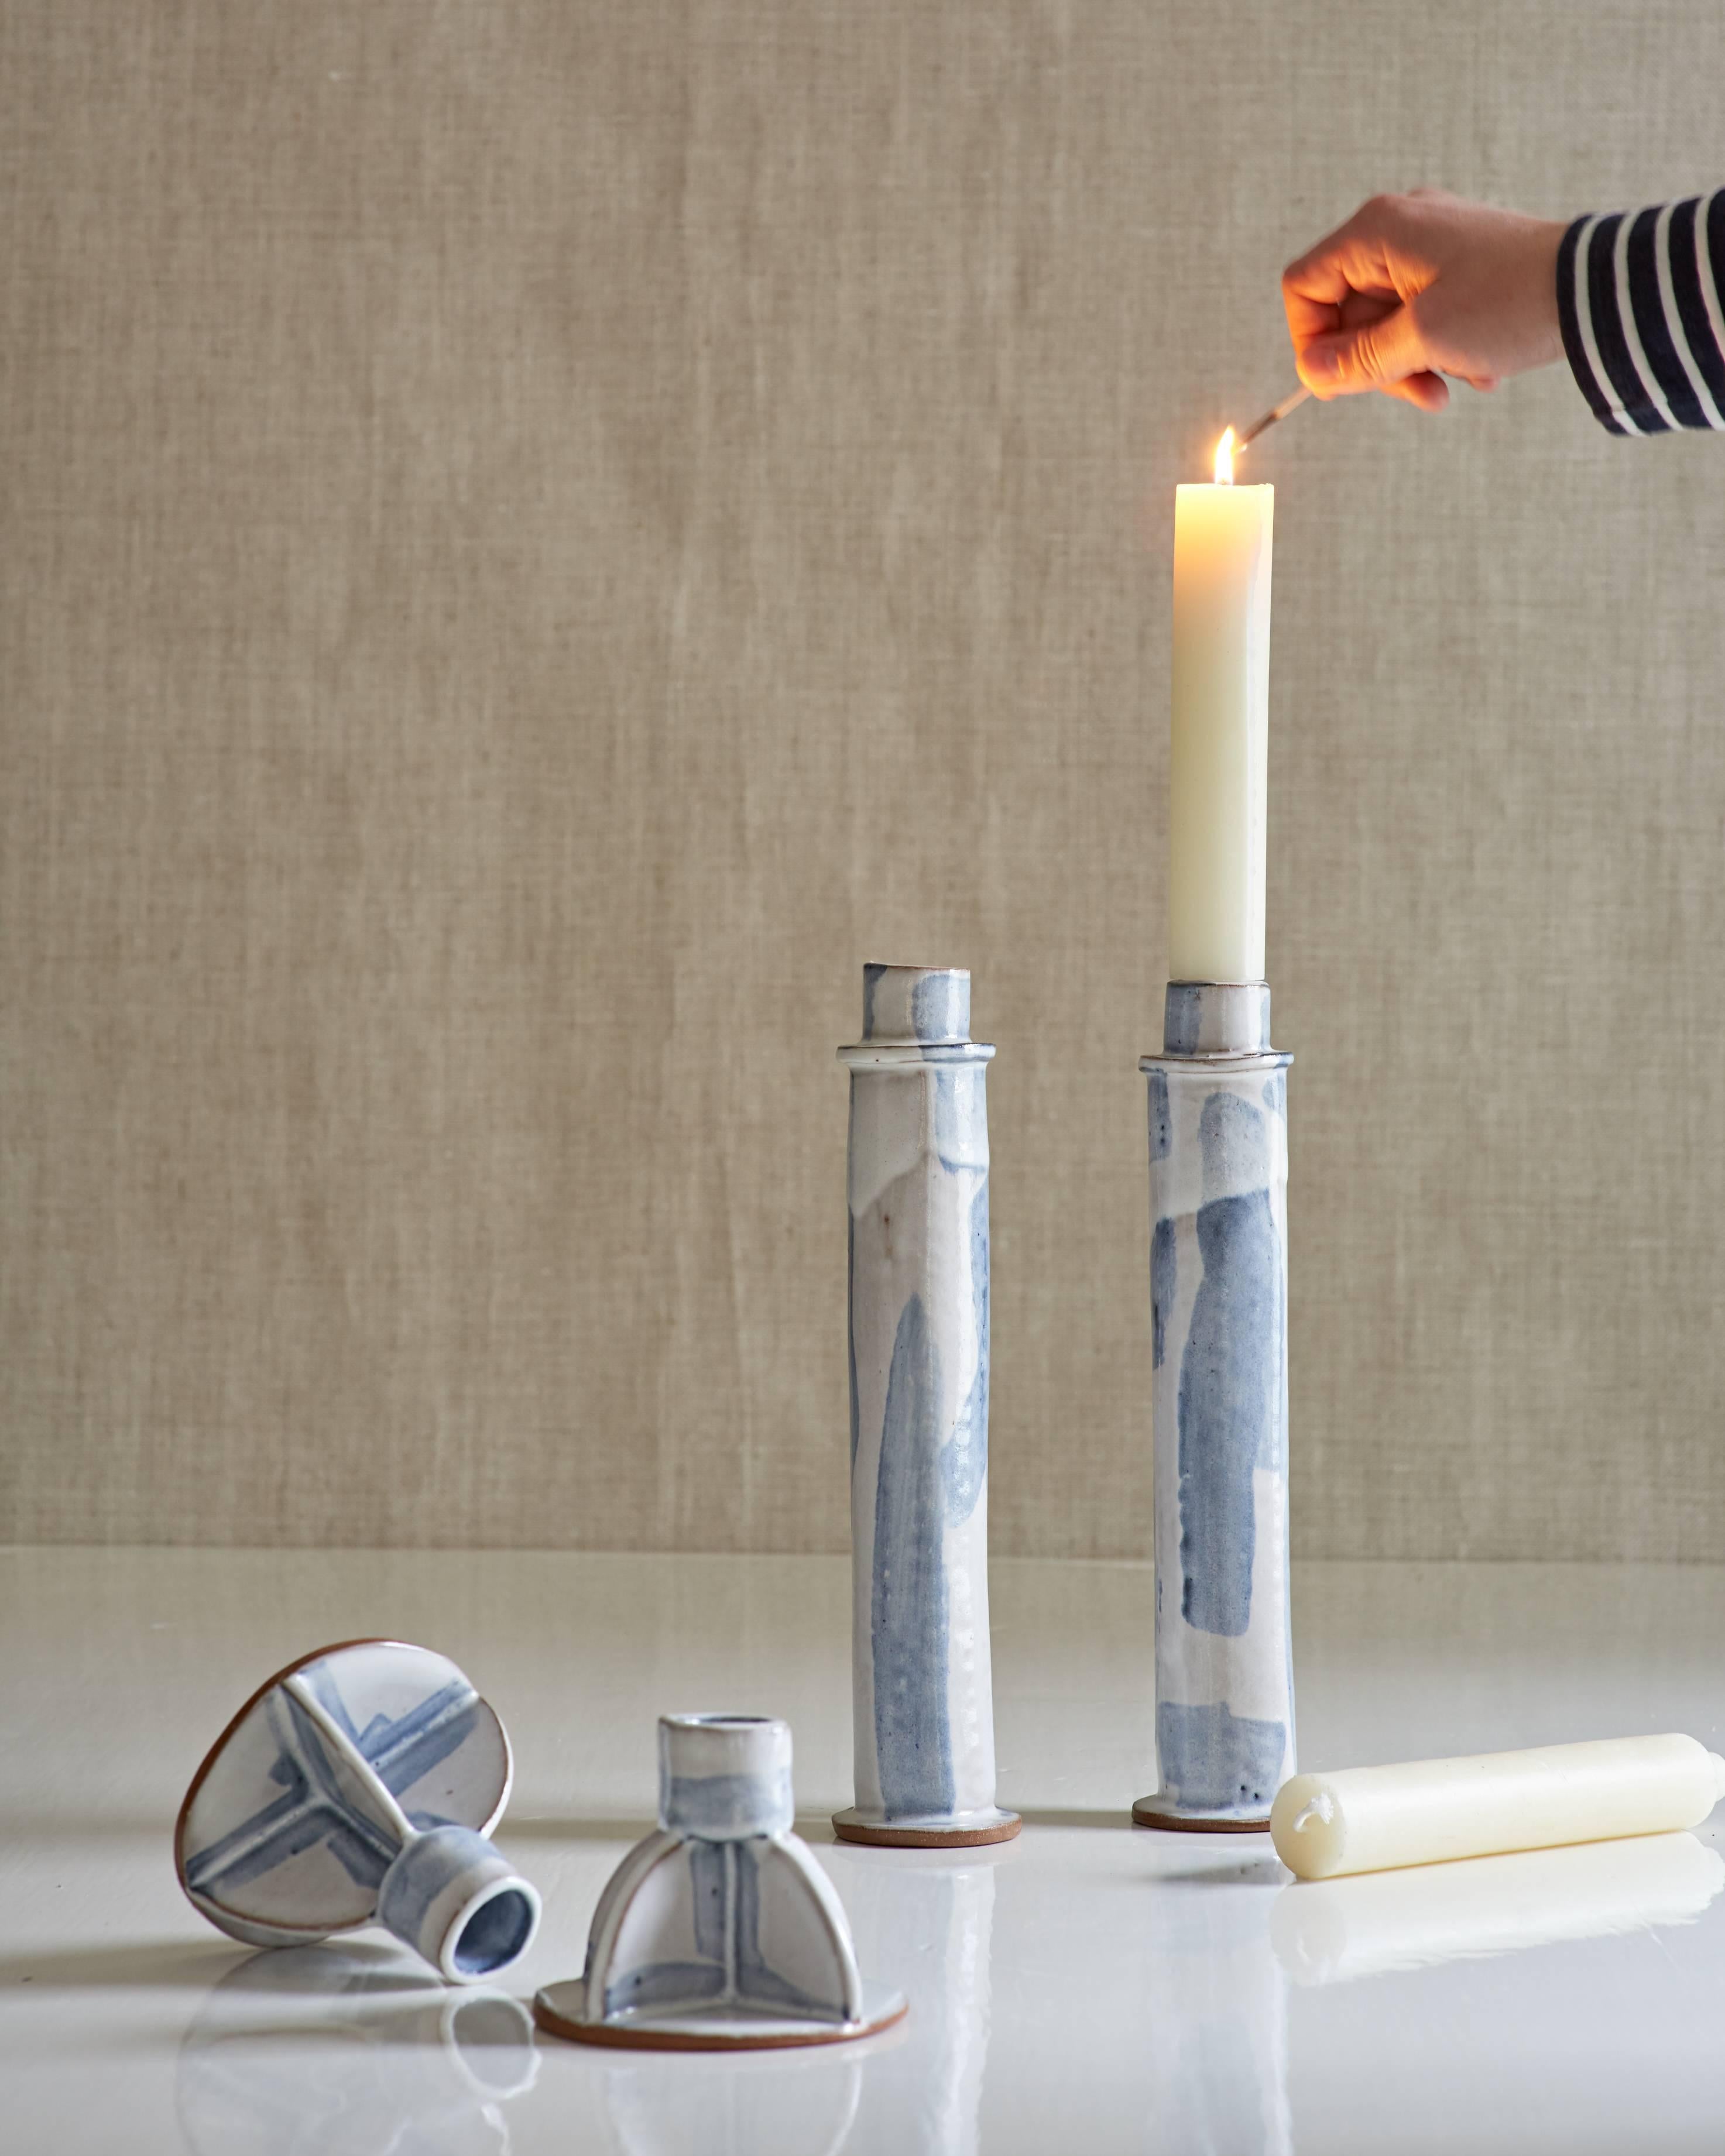 Column Candlestick

Handmade one of a kind slab pottery candle sticks in white wash finish. 

Stoneware with white wash glaze over blue slip.

Measures: Height 12.75”
Width 2.25” diameter 

Products may vary slightly from the product images due to